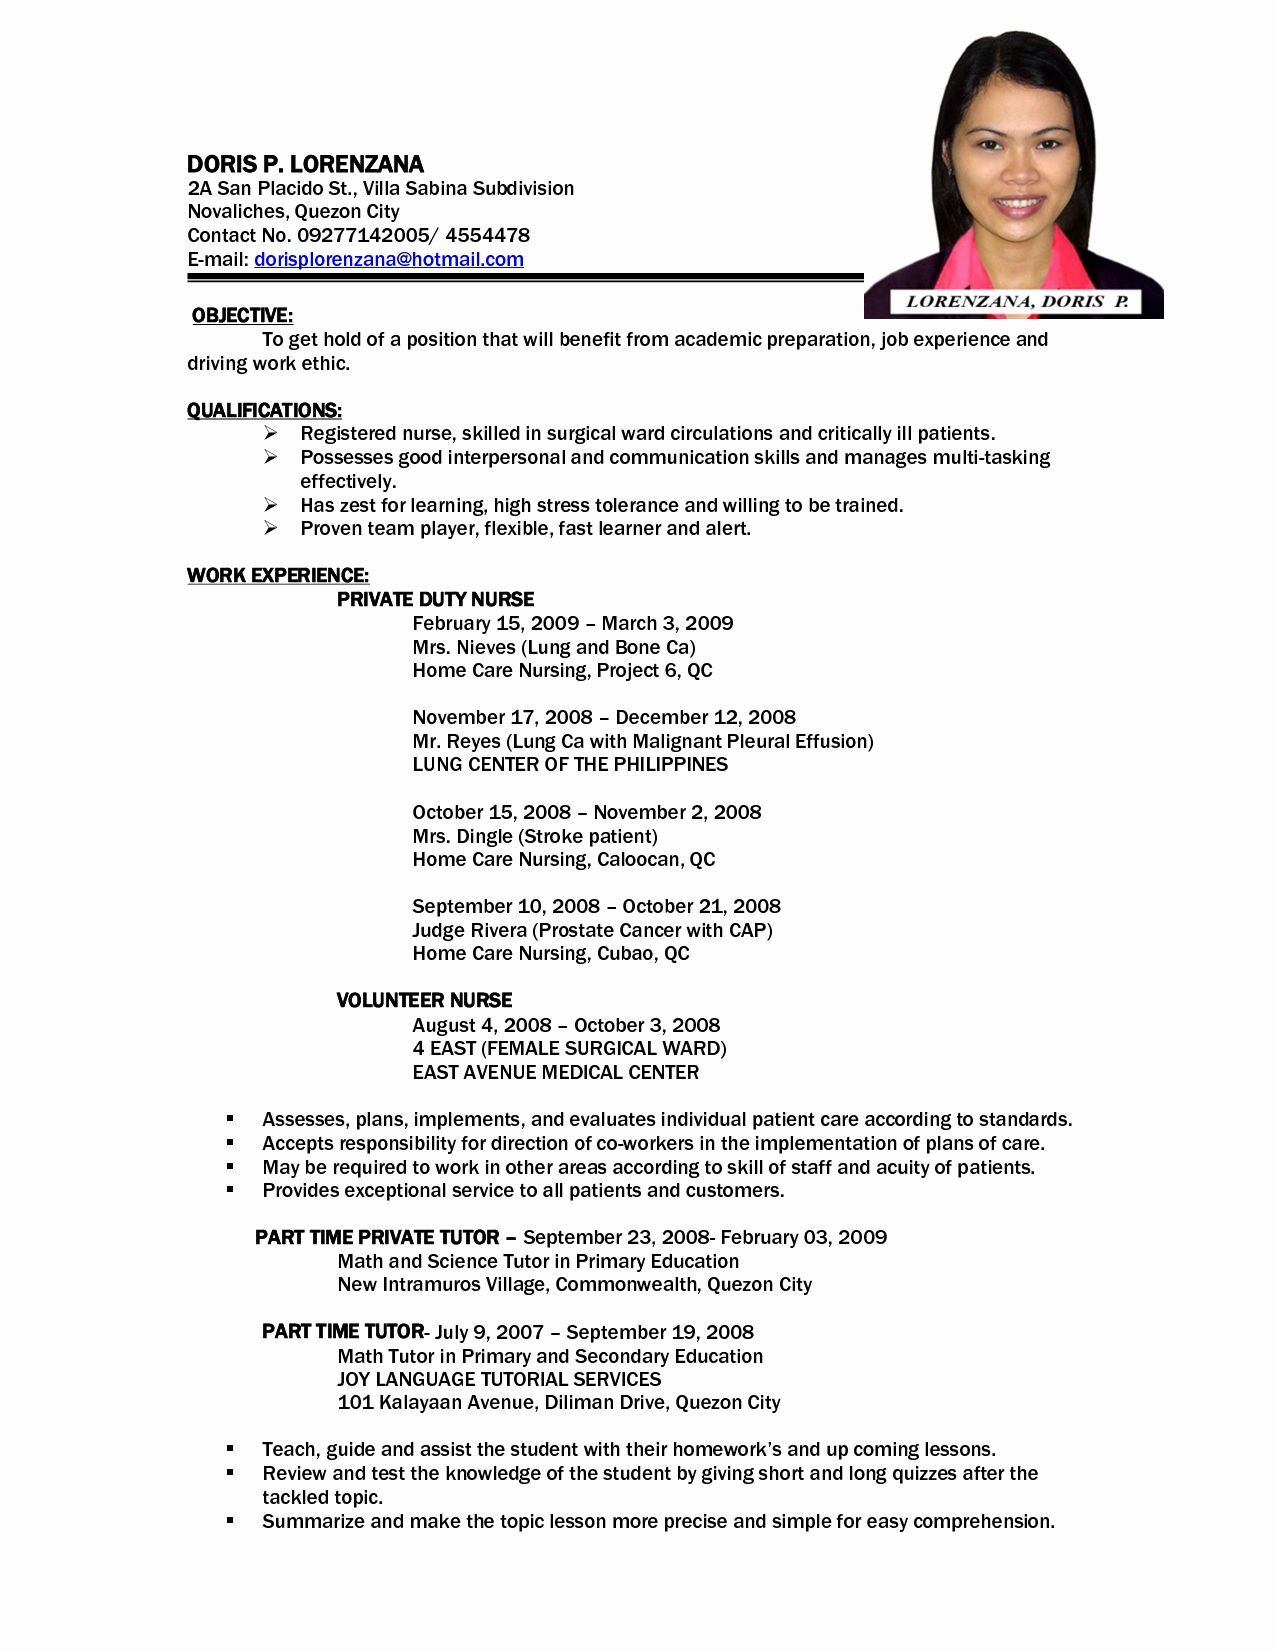 Sample Resume Philippines with Work Experience Filipino Resume Sample – Derel